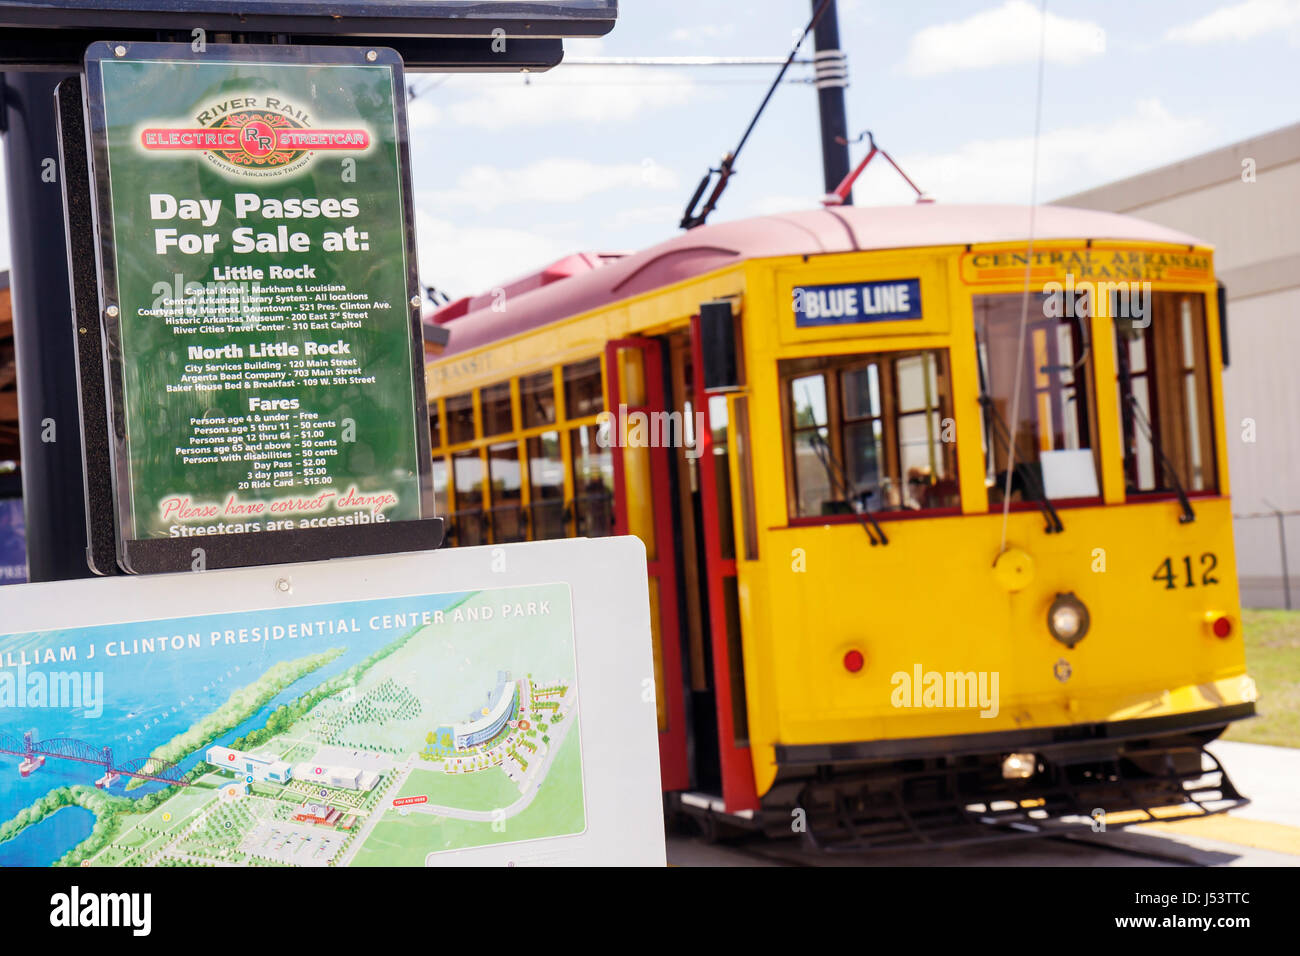 Little Rock Arkansas,World Street,River Rail Electric Streetcar,sign,schedule,map,information,heritage,trolley,replica,light rail system,downtown red, Stock Photo